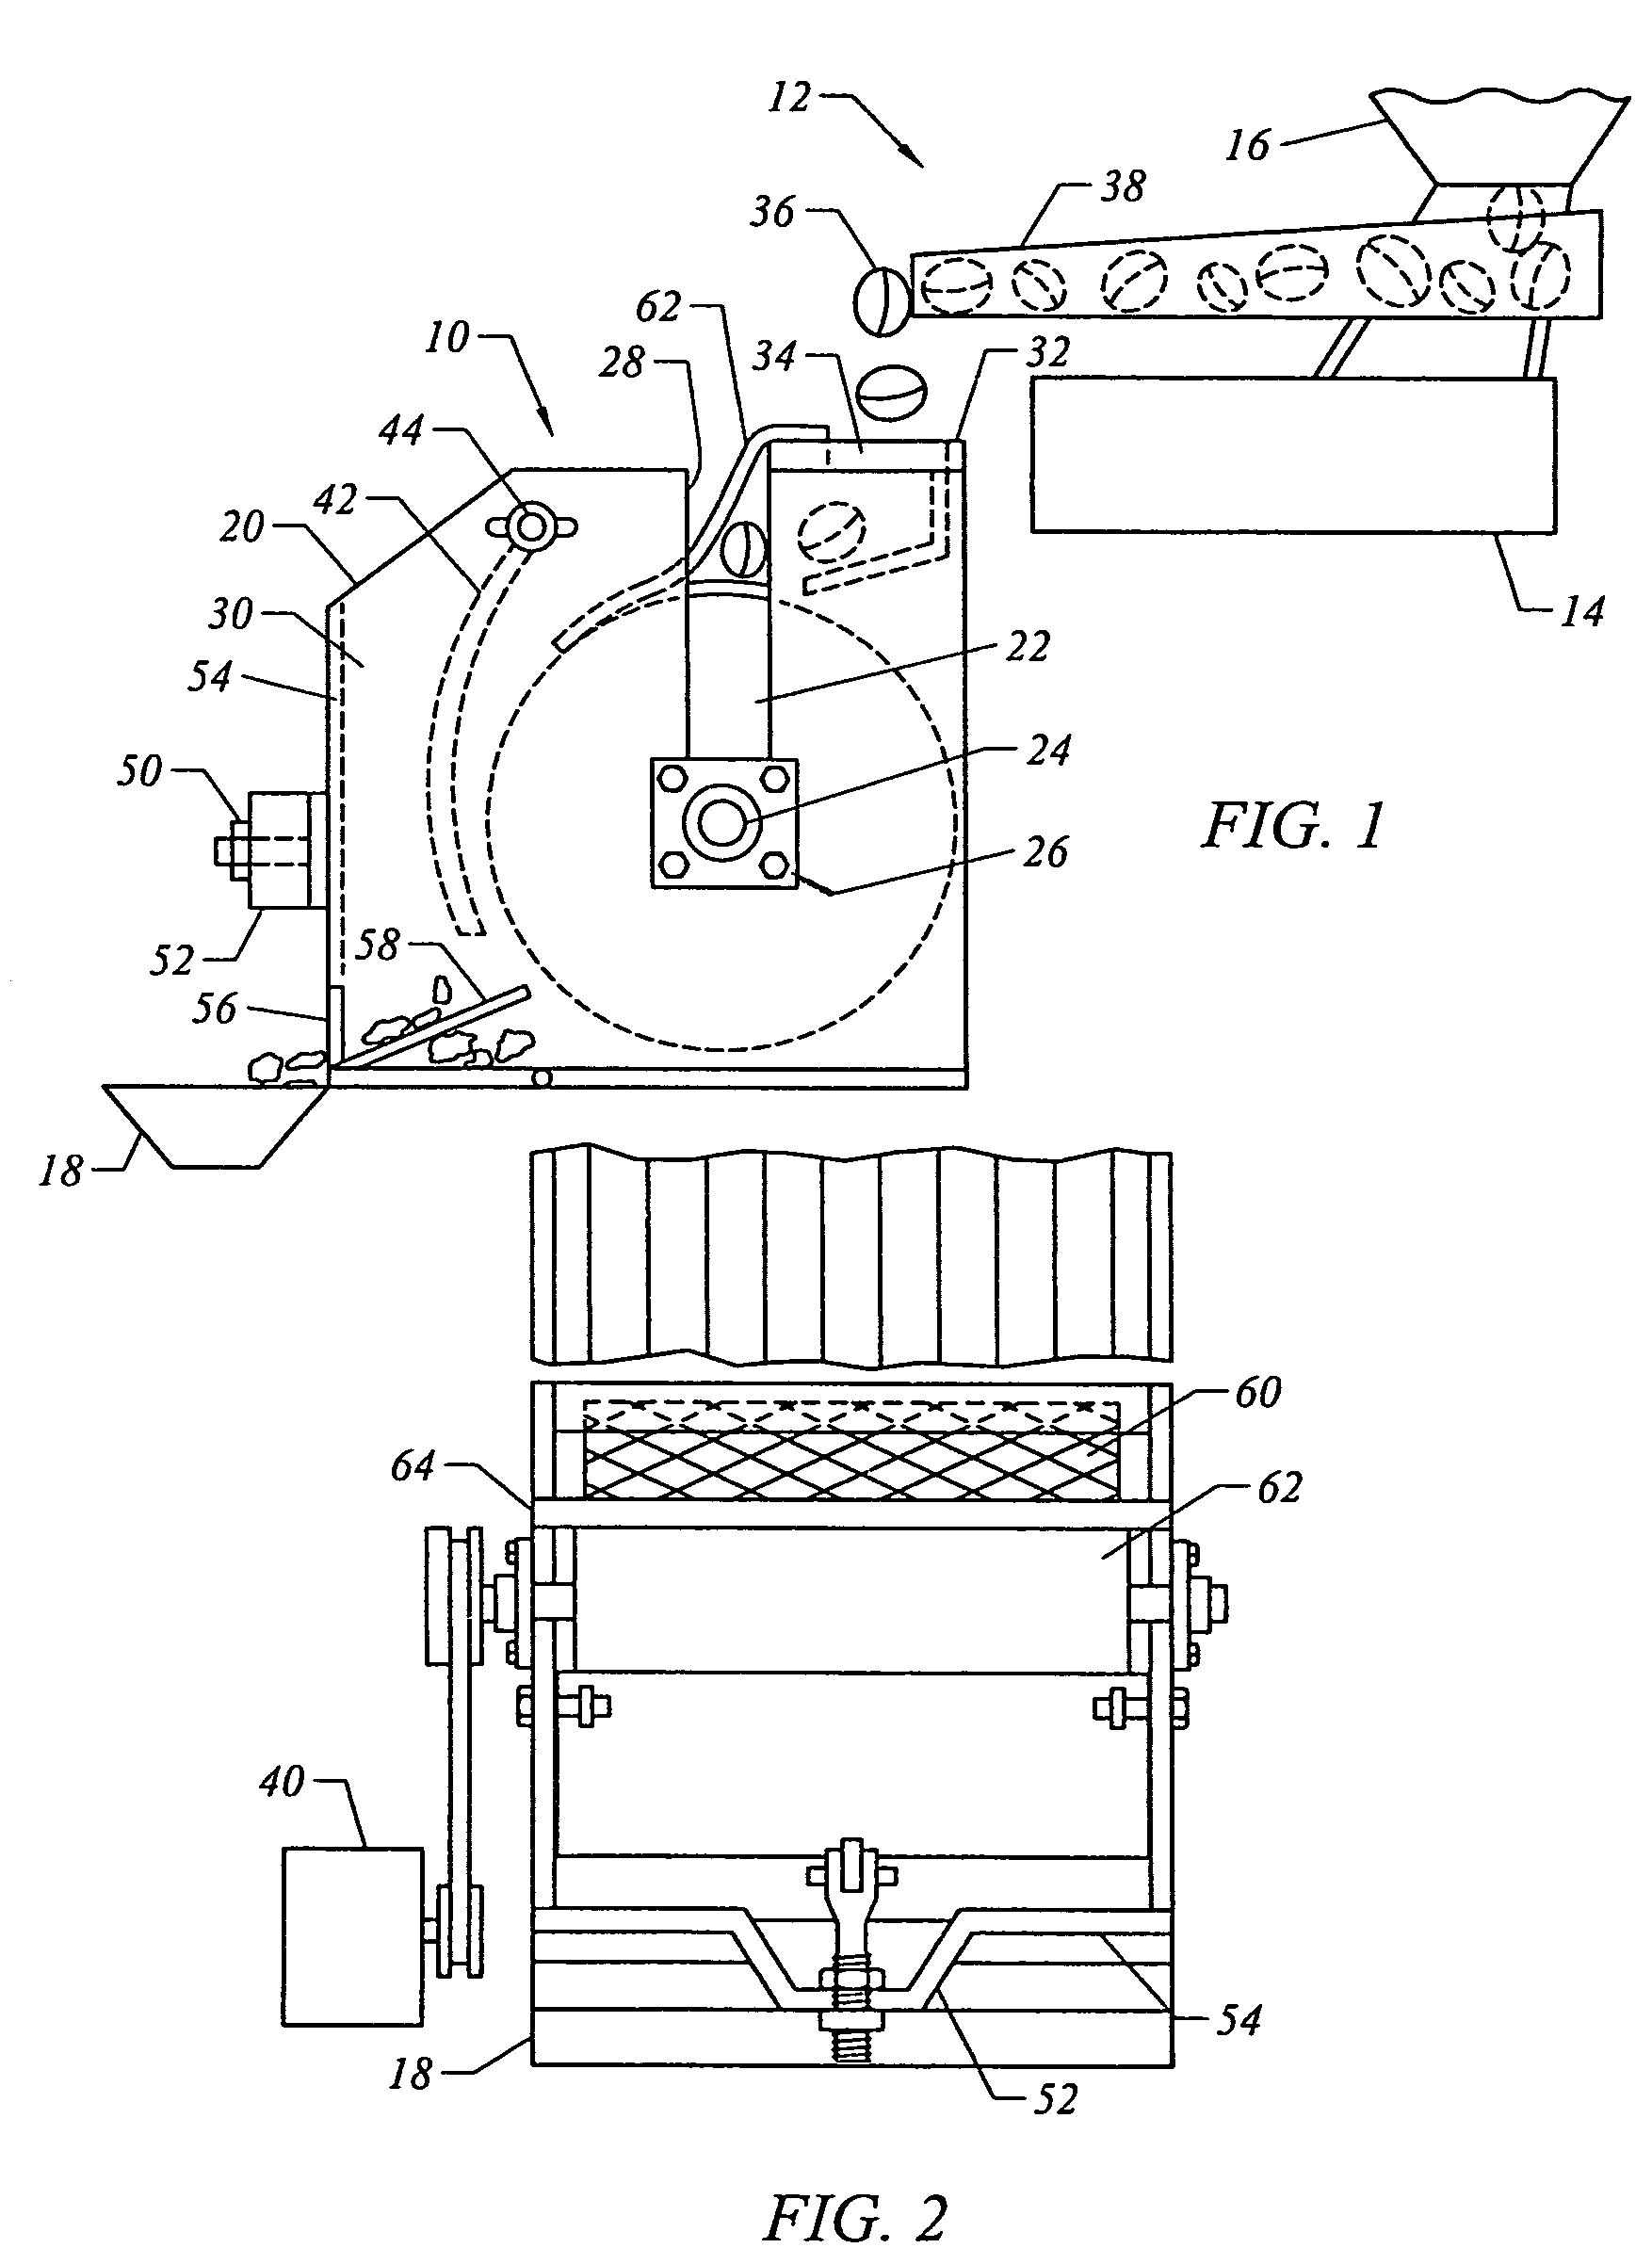 Nut cracking mechanism for variable-sized nuts